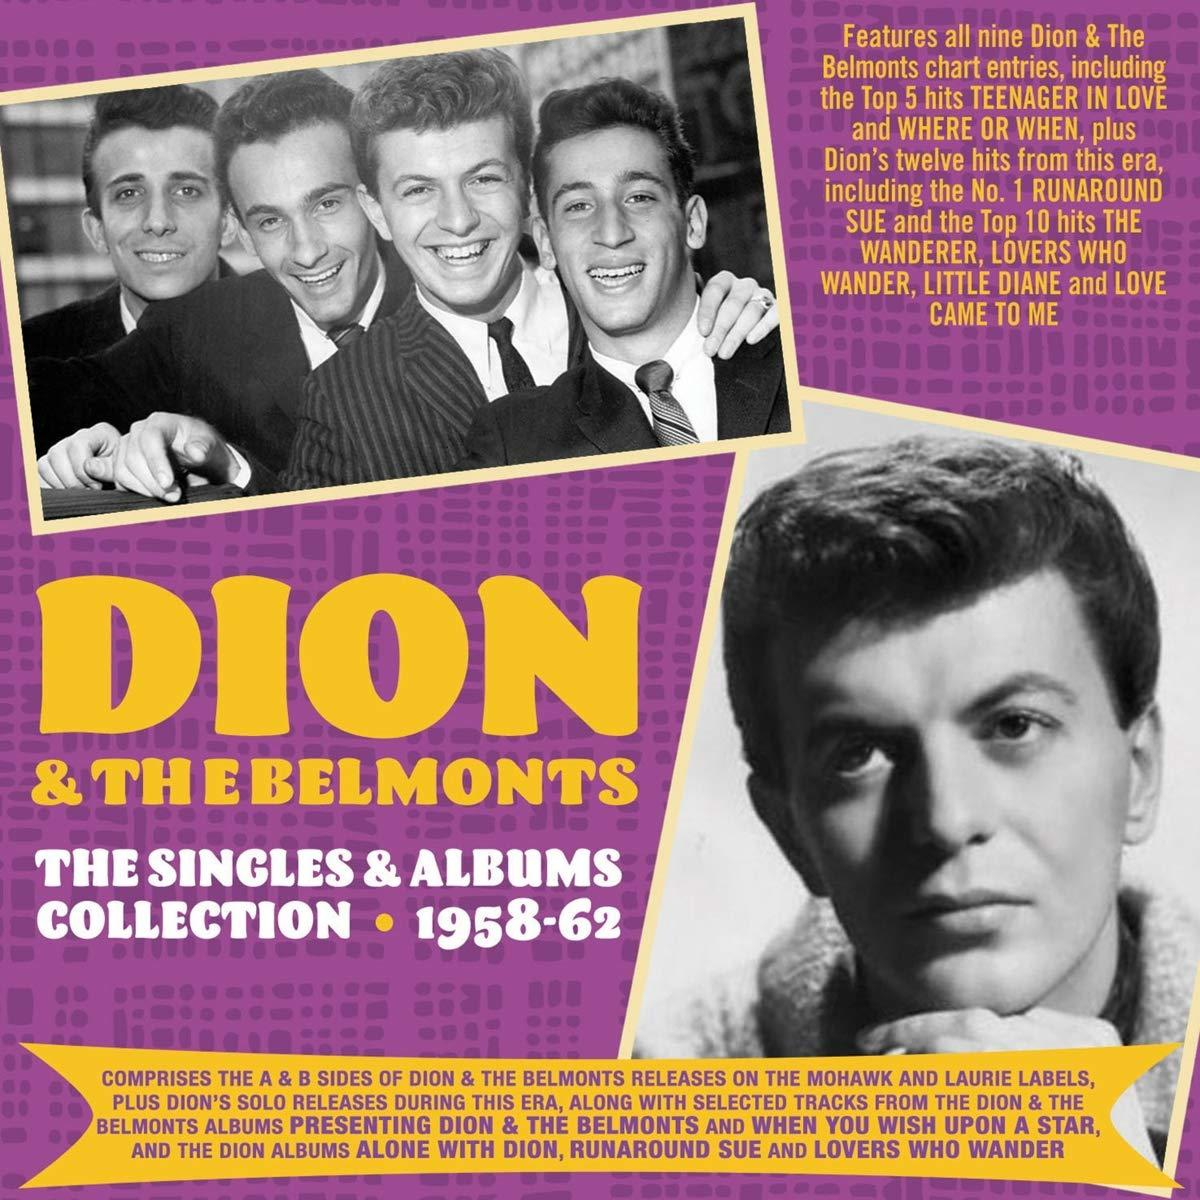 1957-62 COLLECTION (CD) The Belmonts - And - Dion SINGLES ALBUMS &